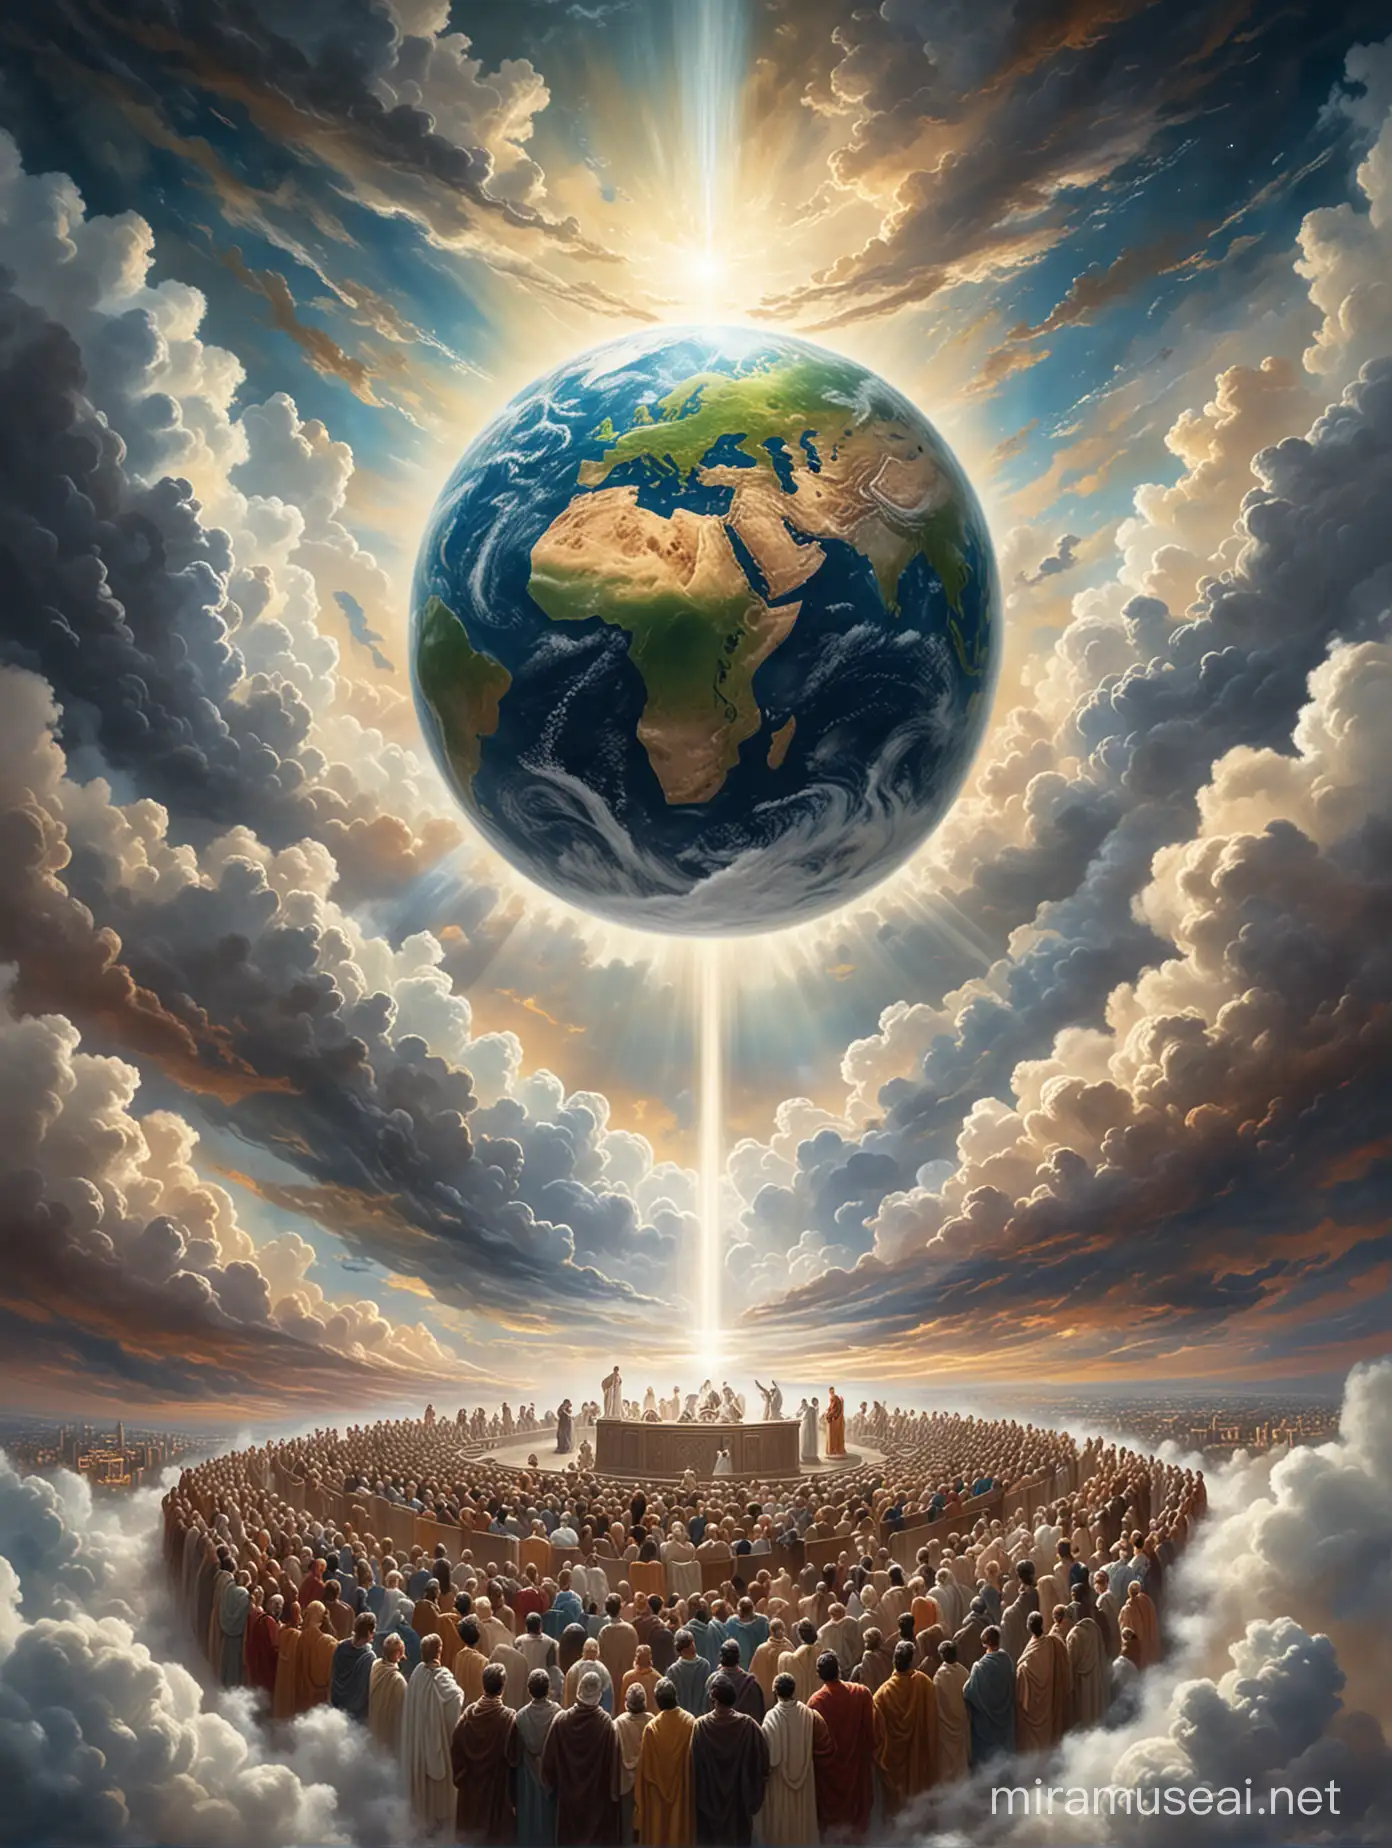 Celestial Synagogue Earth Emerges from Clouds as Disciples Gaze Upward